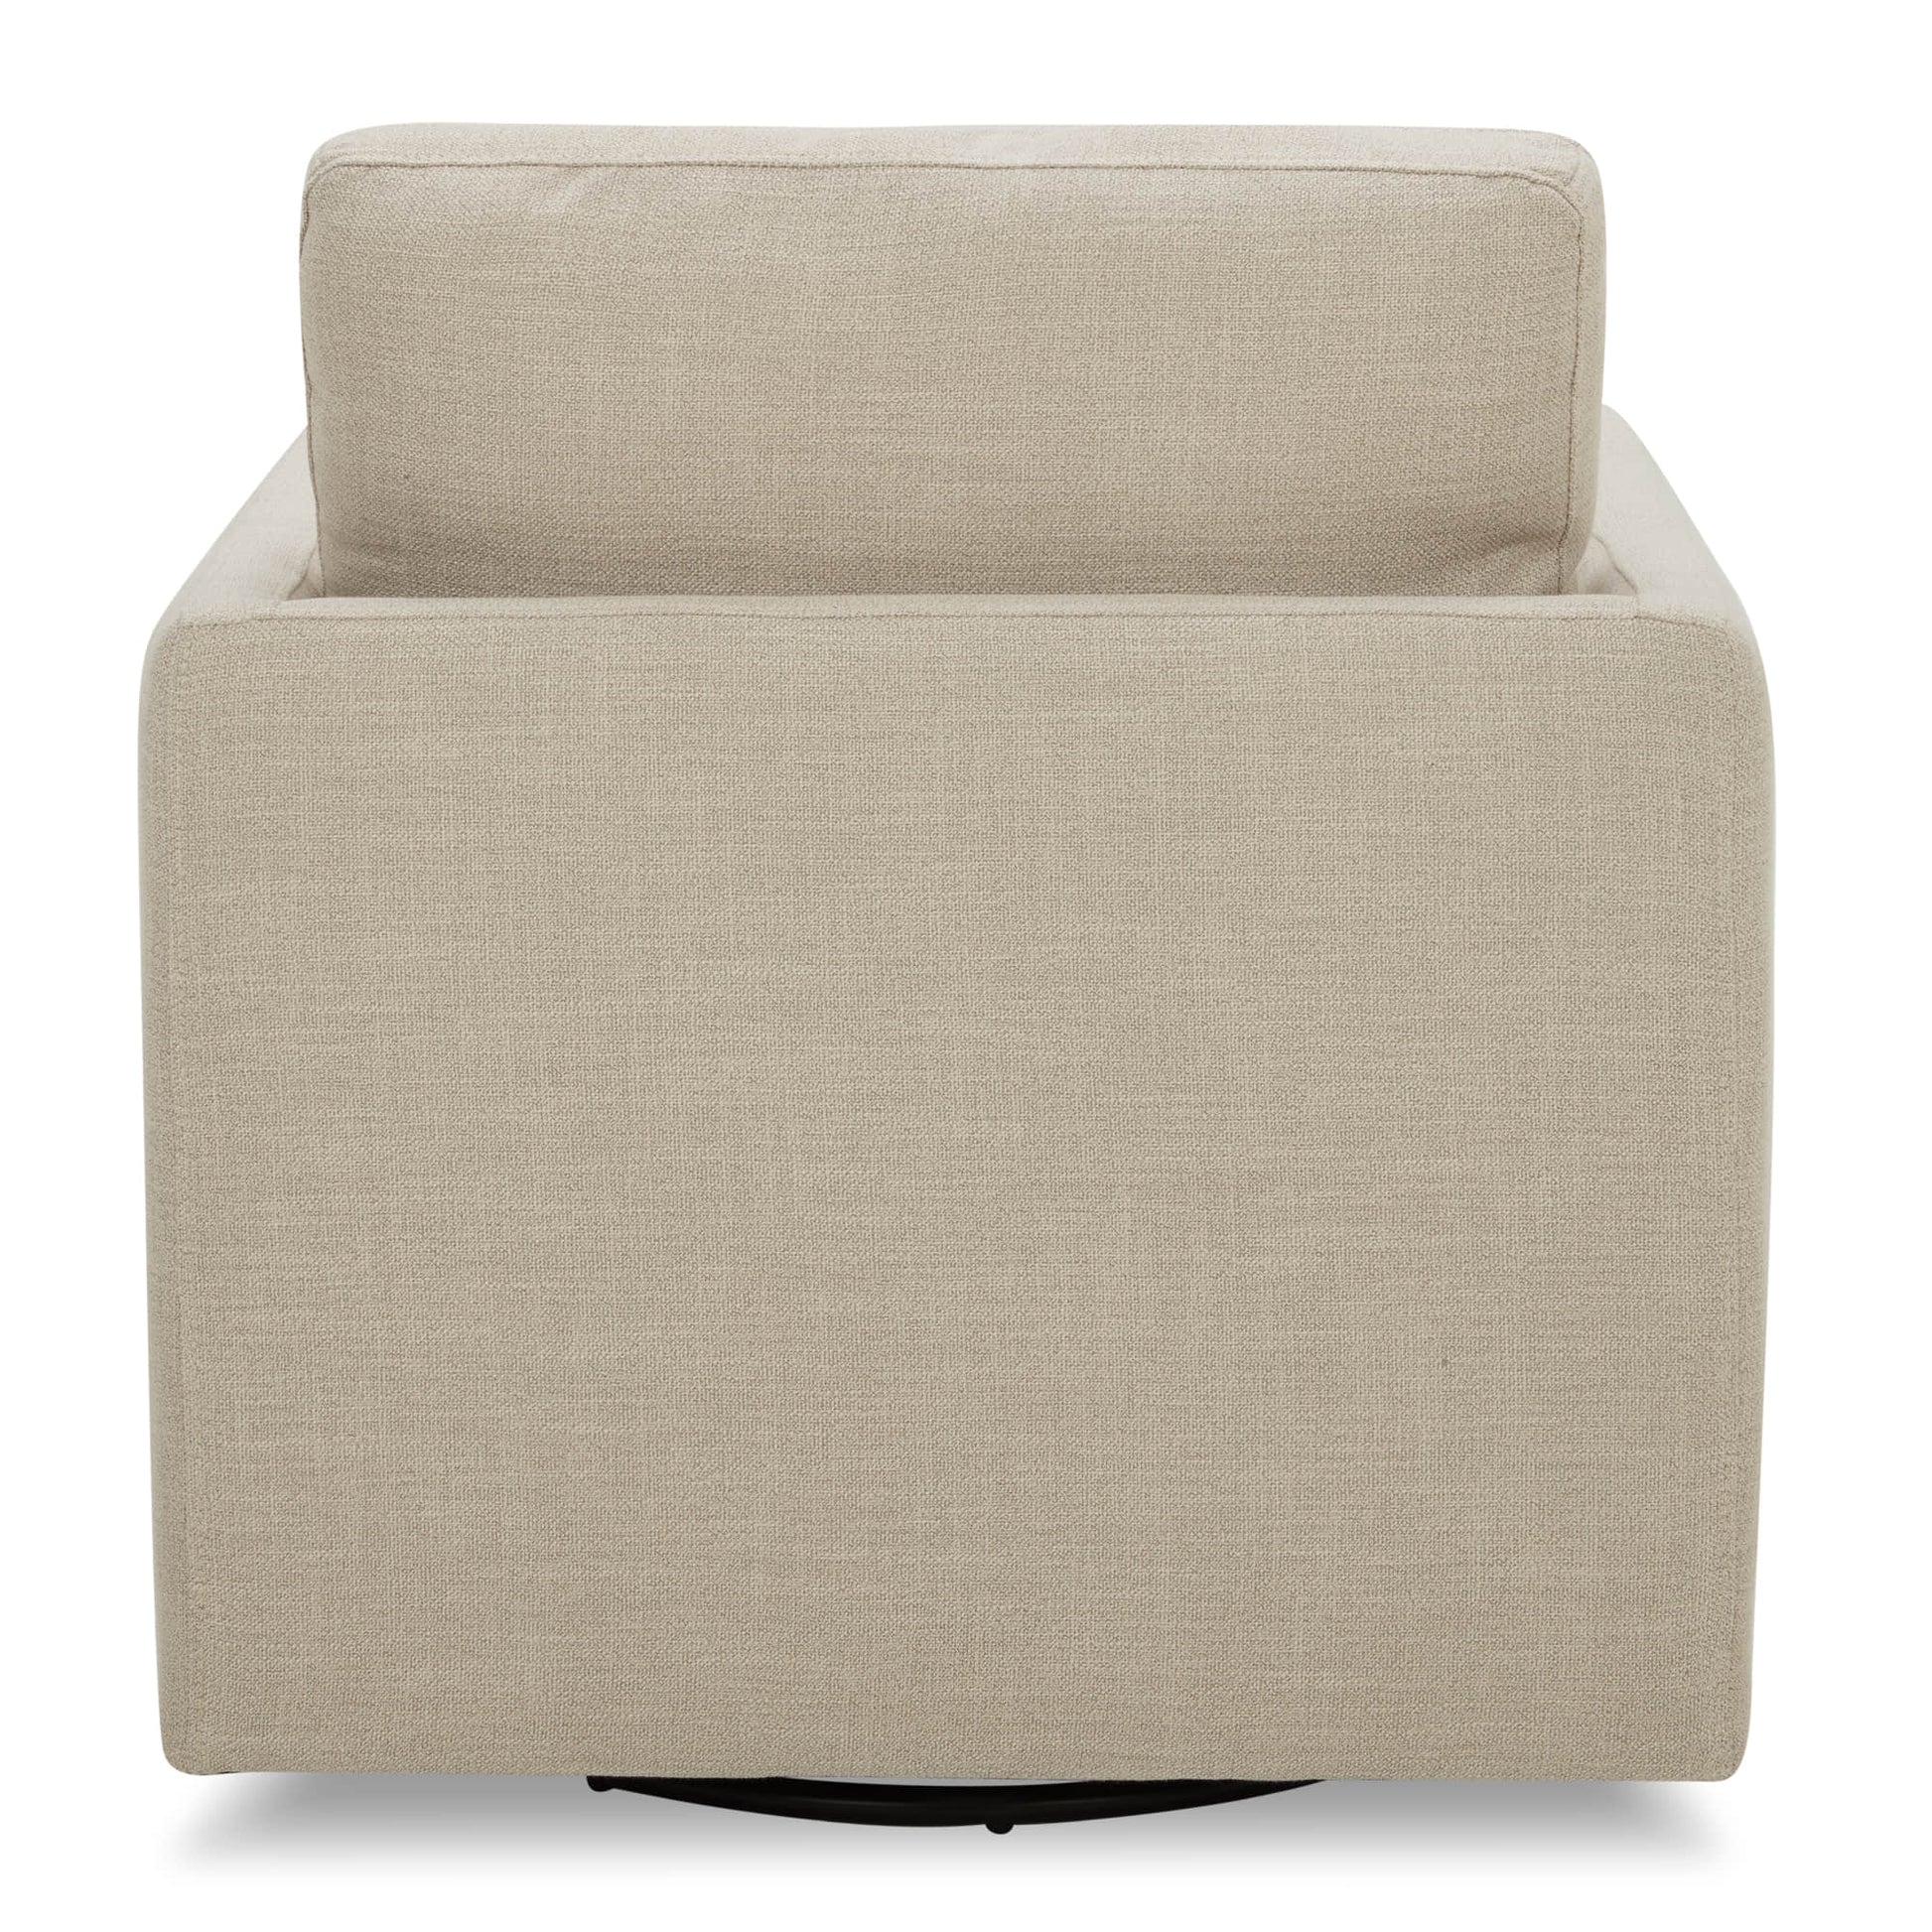 CHITA LIVING-Emma Contemporary Swivel Armchair Accent Chair-Accent Chair-Fabric-Flax Beige-